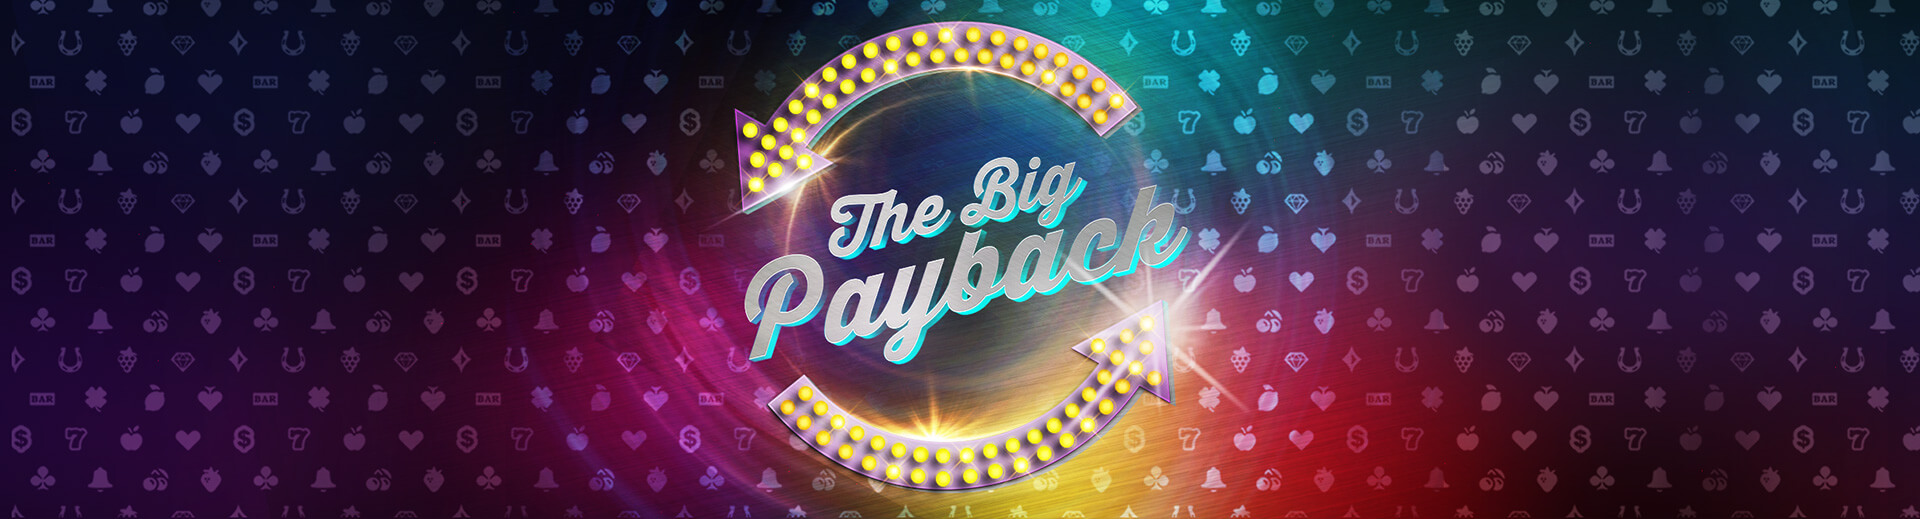 the-big-payback-banner